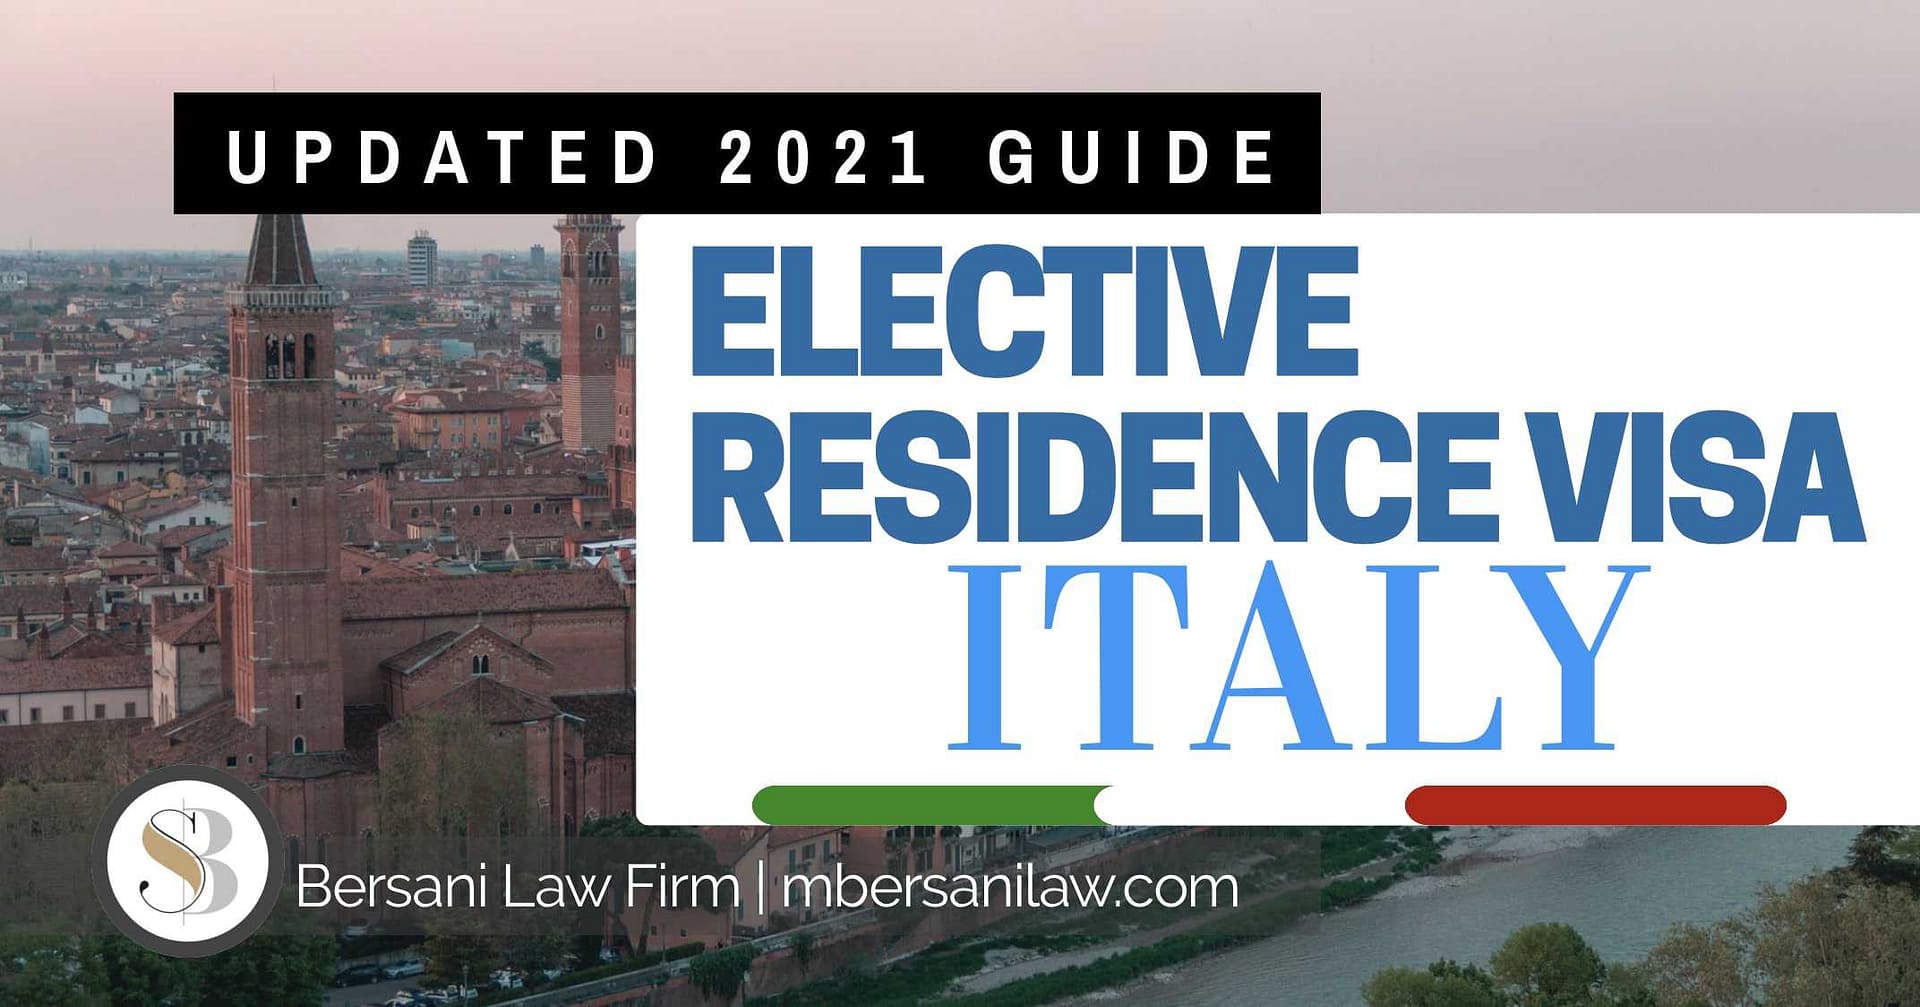 Elective Residence Visa Italy [UPDATED 2021] Full Guide